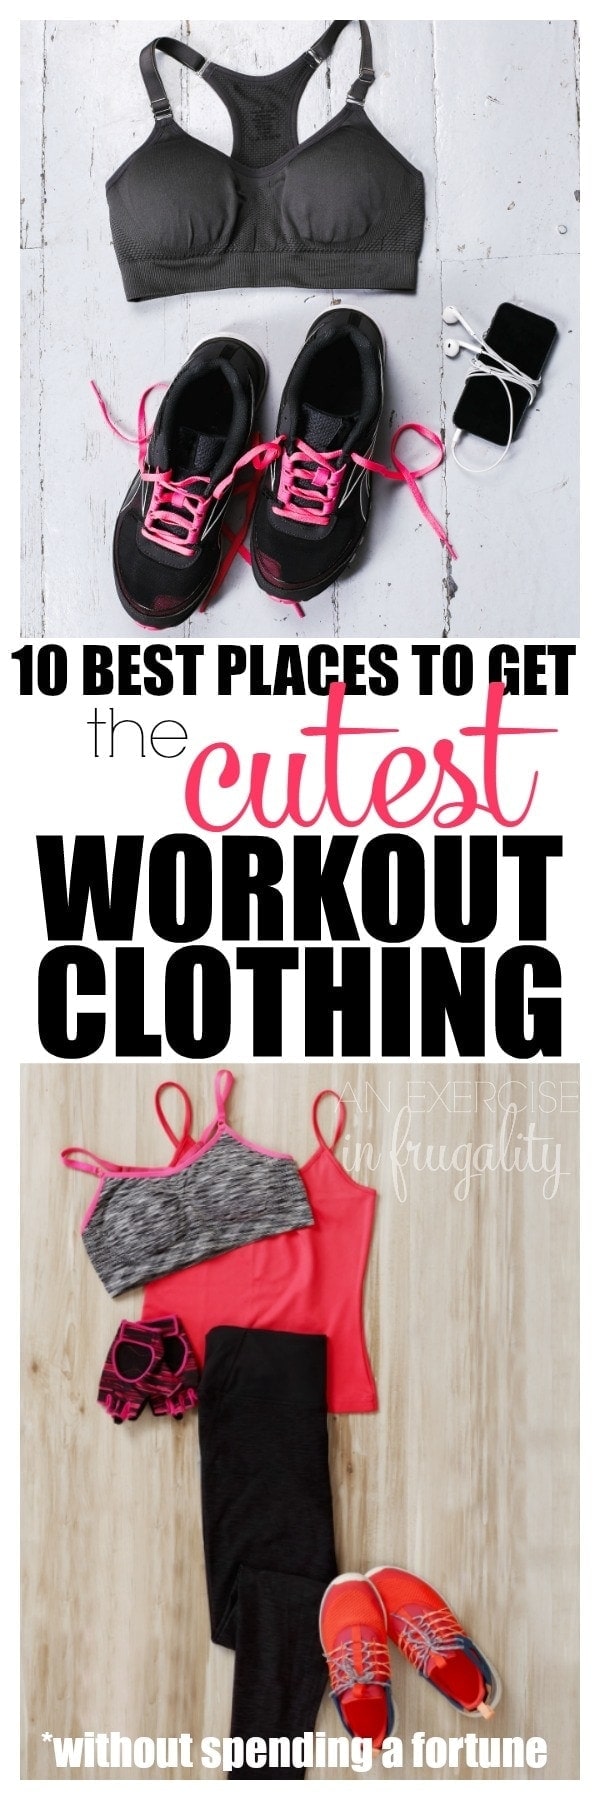 Cheap Workout Clothes-Where to Find The Cute Stuff - An Exercise in ...